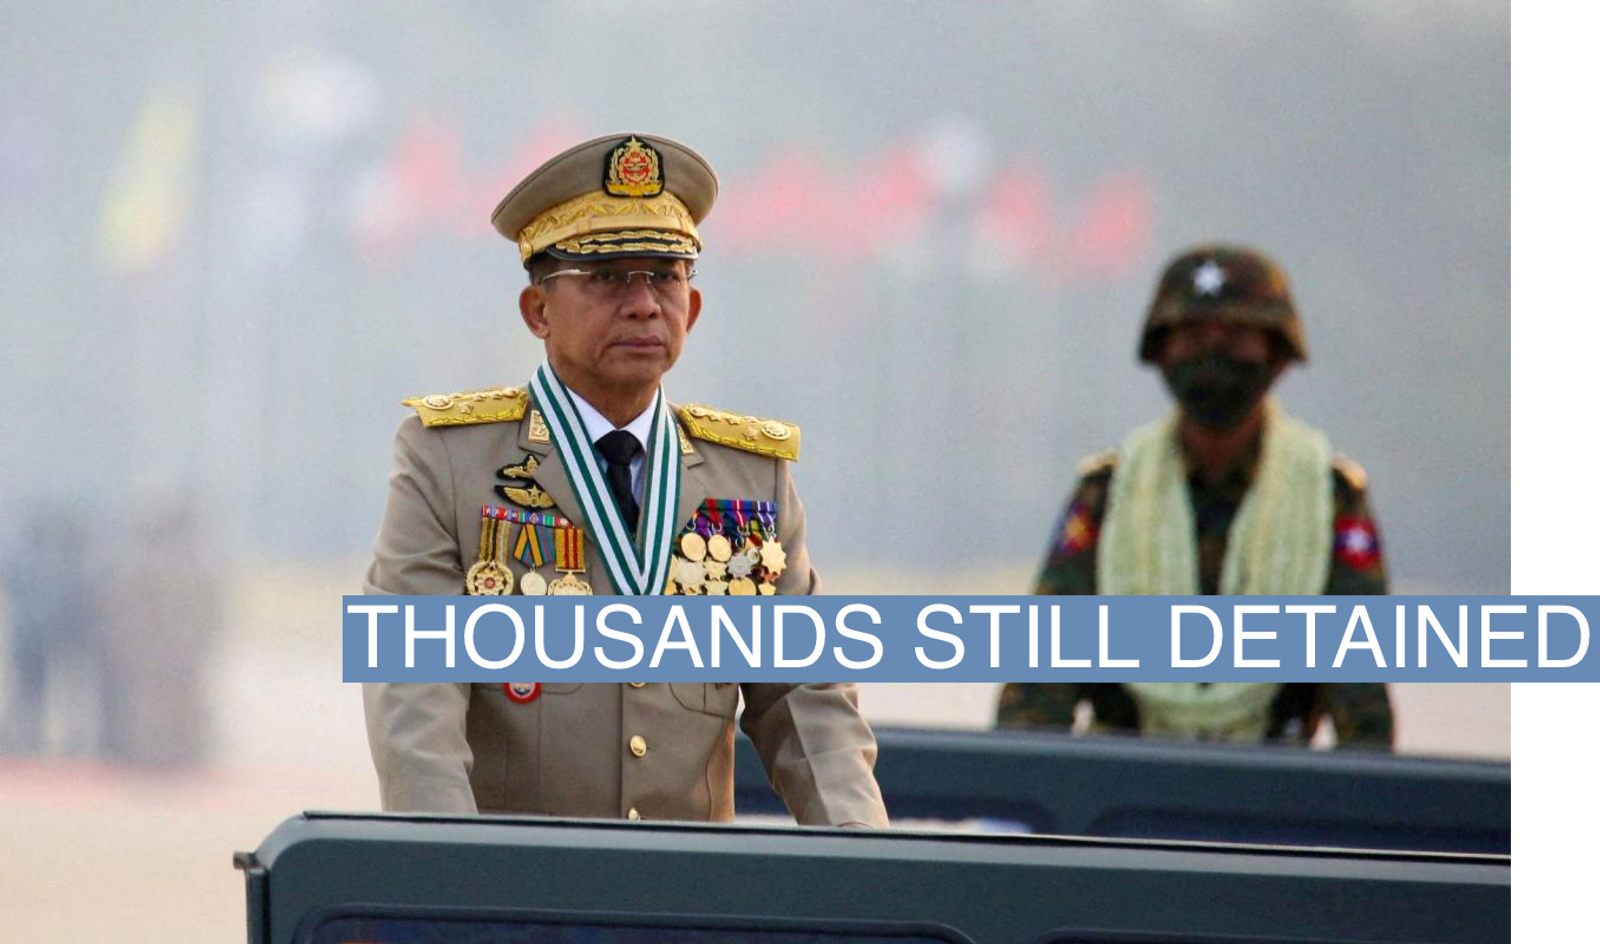 Myanmar's junta chief Senior General Min Aung Hlaing, who ousted the elected government in a coup on February 1, 2021.